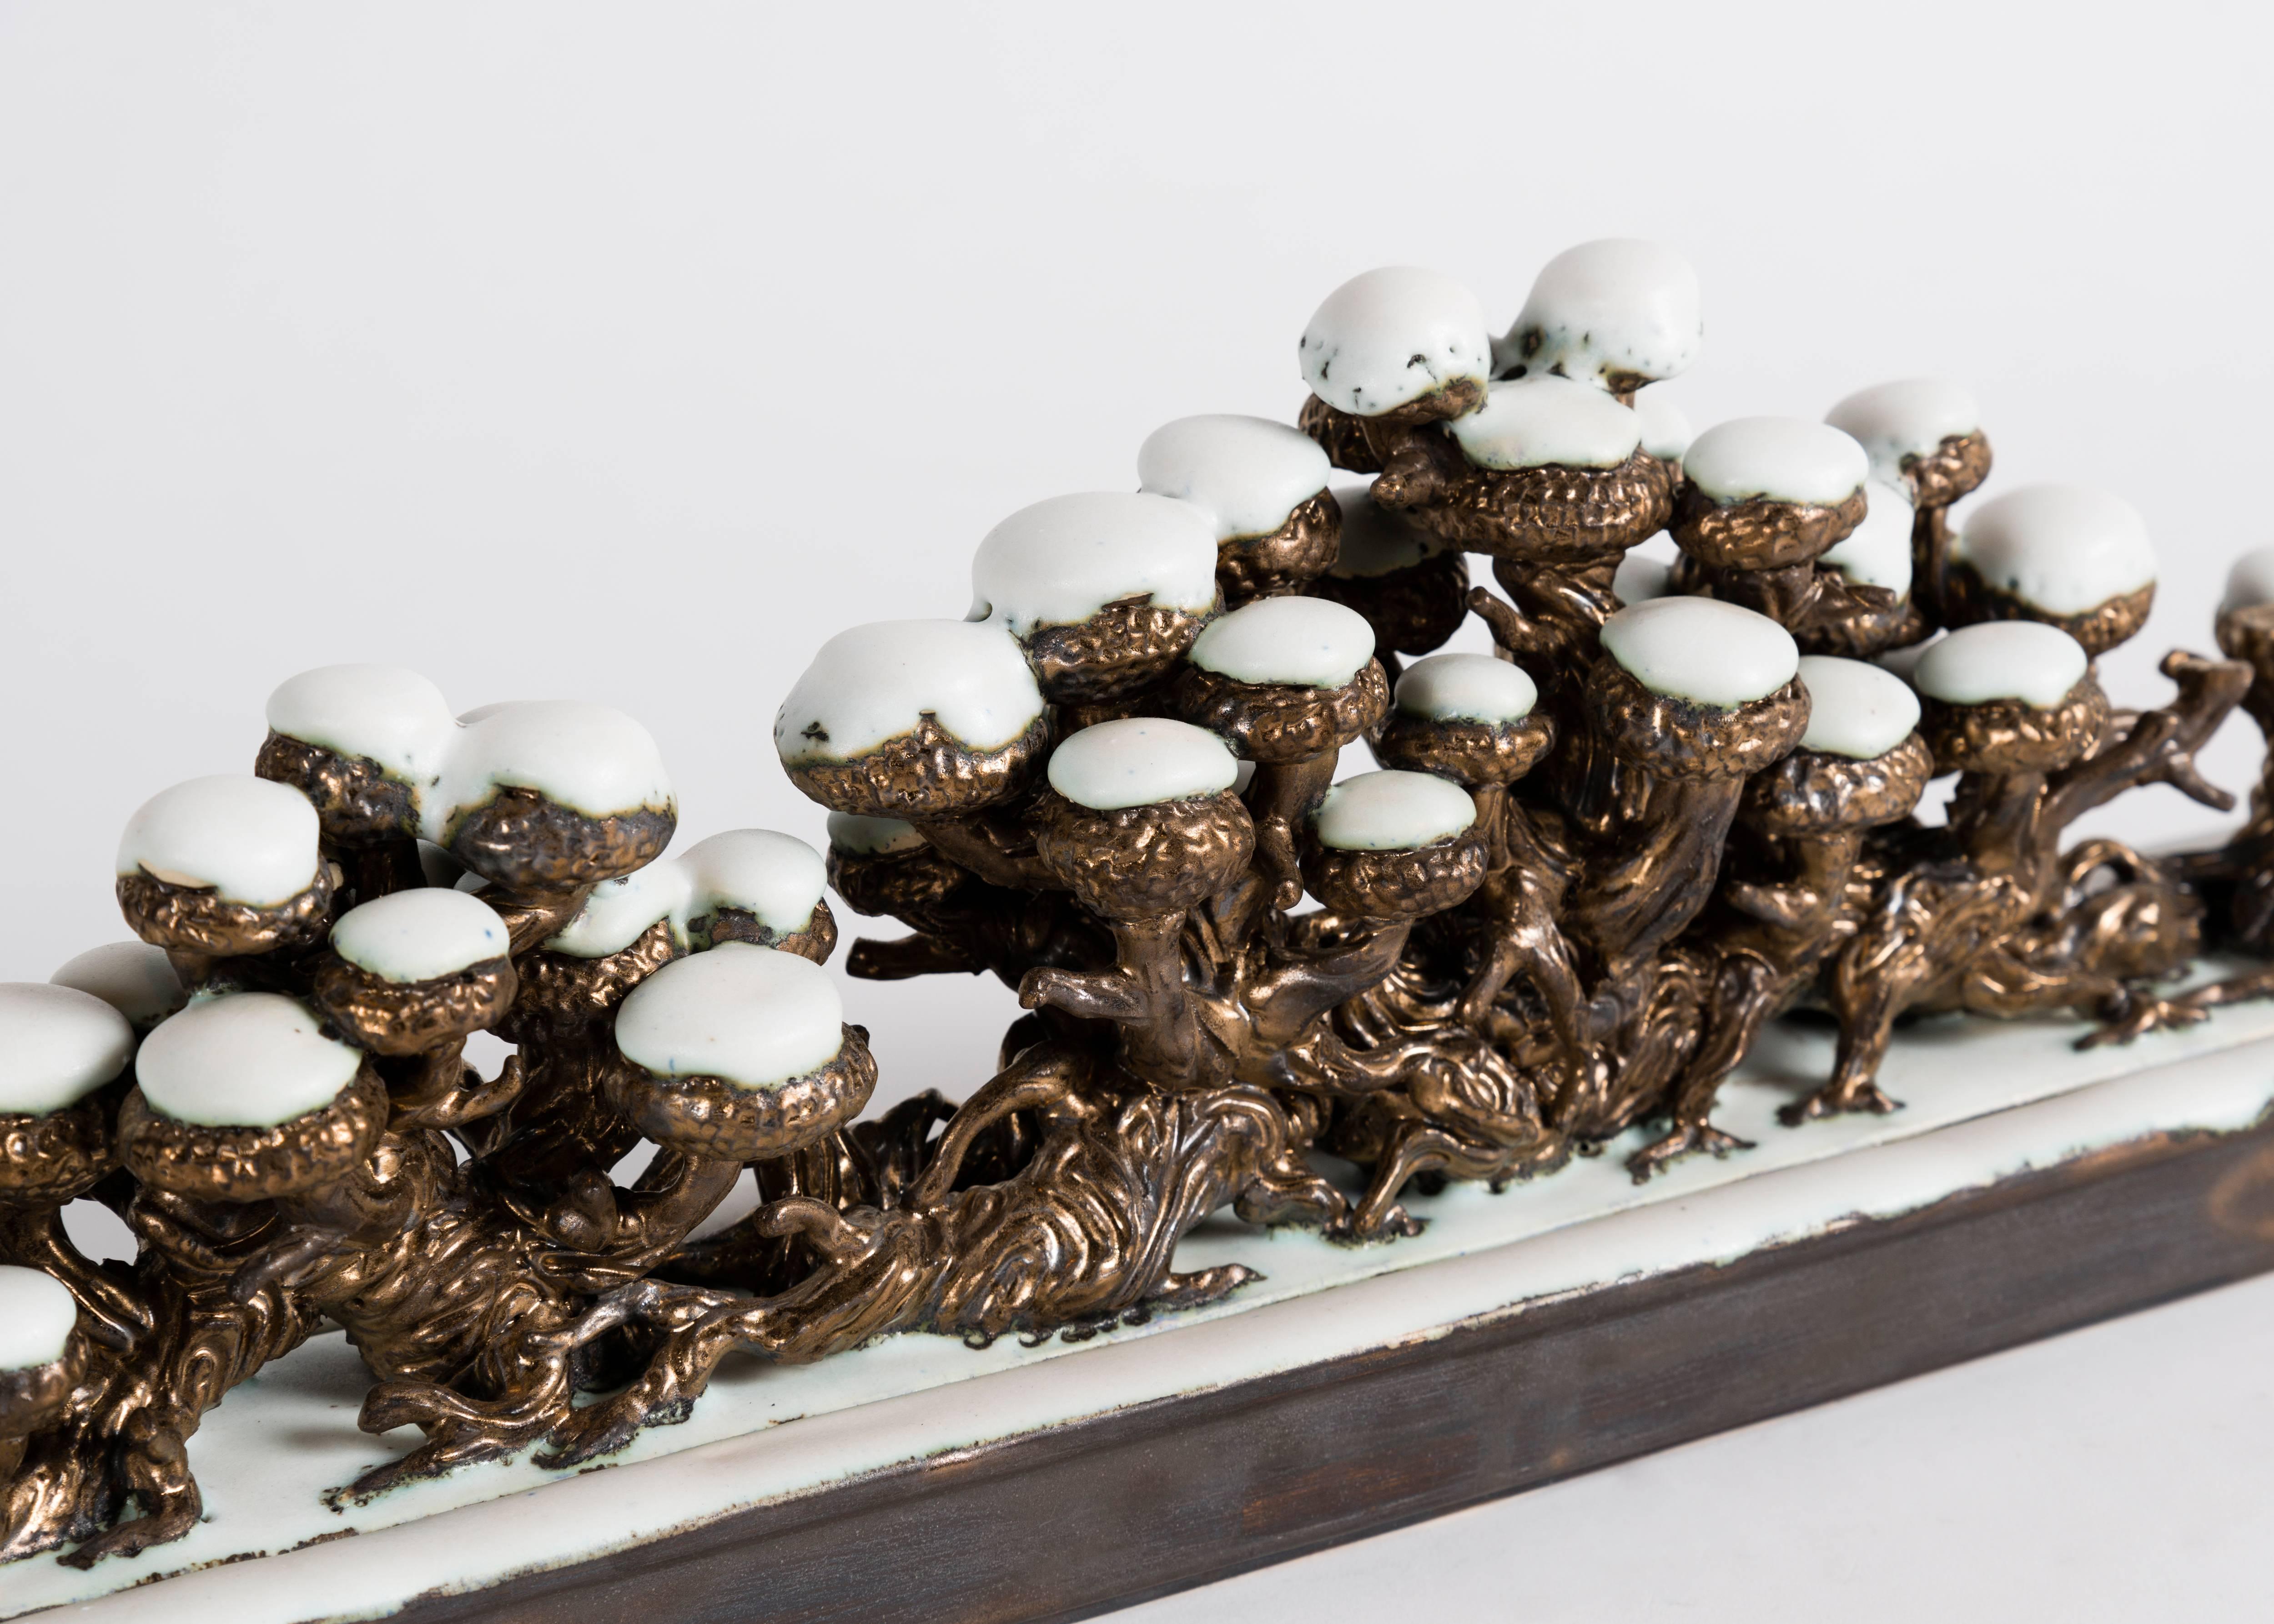 A remarkably fresh, new creation from New York based ceramicist Matthew Solomon, this box intimates a cluster of snow-capped mushrooms.

Signed and dated: Solomon 17

Unique piece.